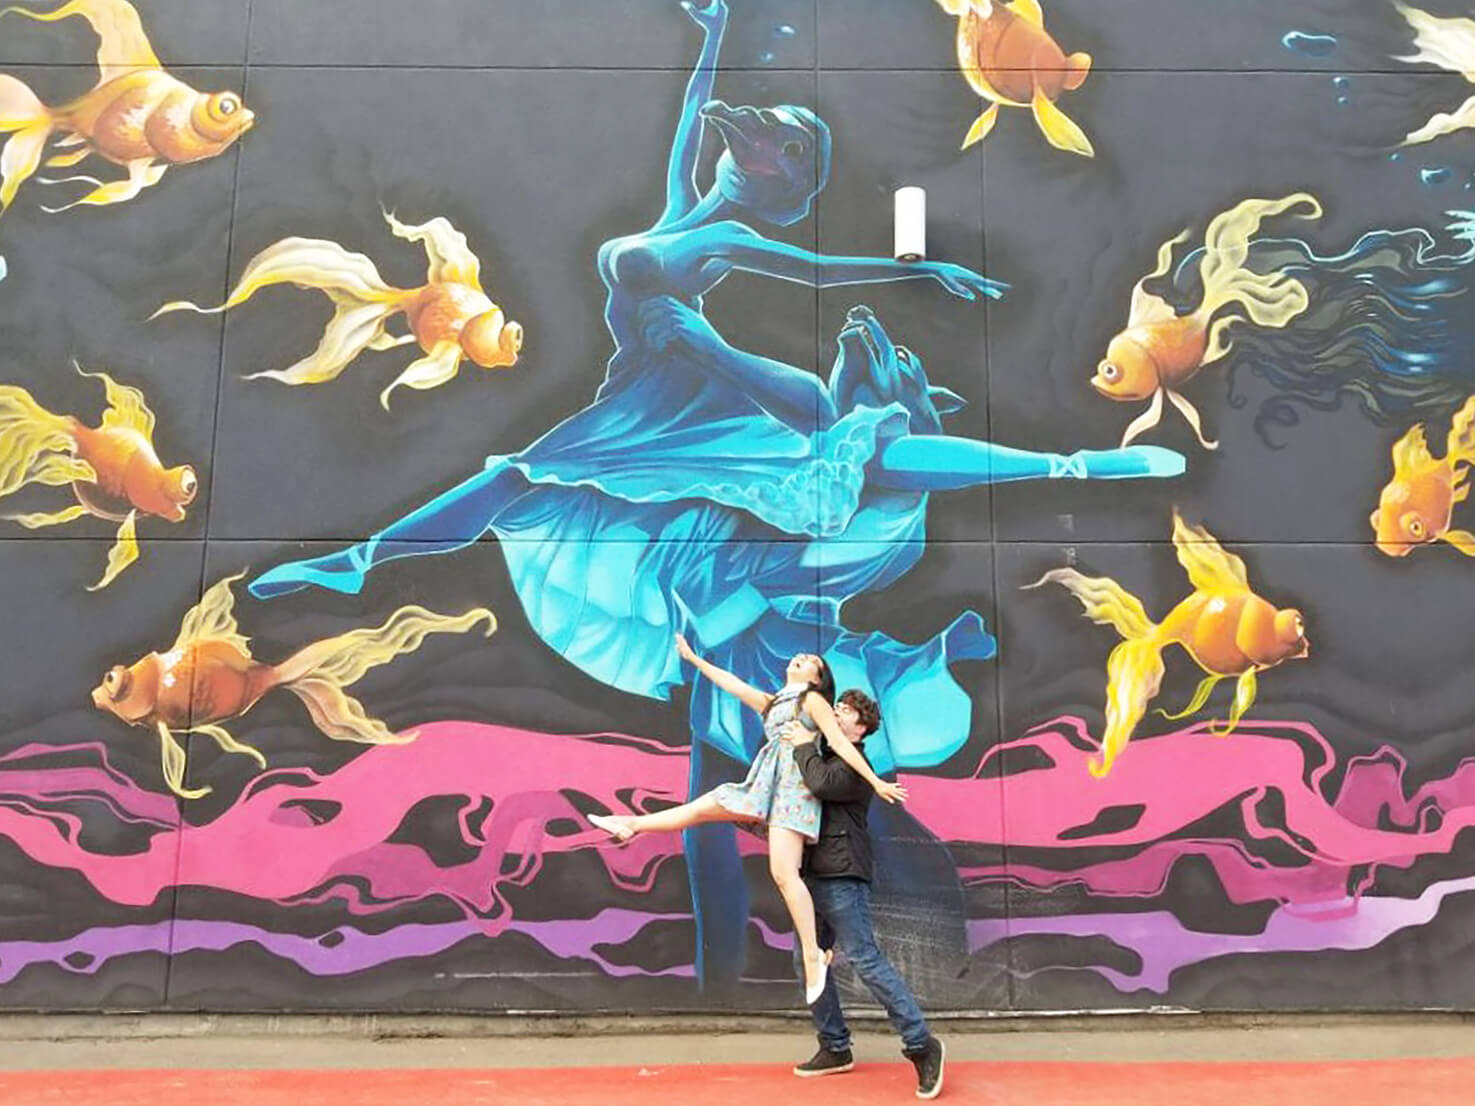 Instagrammable Walls of Calgary - Dances with Wolves Mural - Nelson Dedos Garcia Nomadic Alternatives